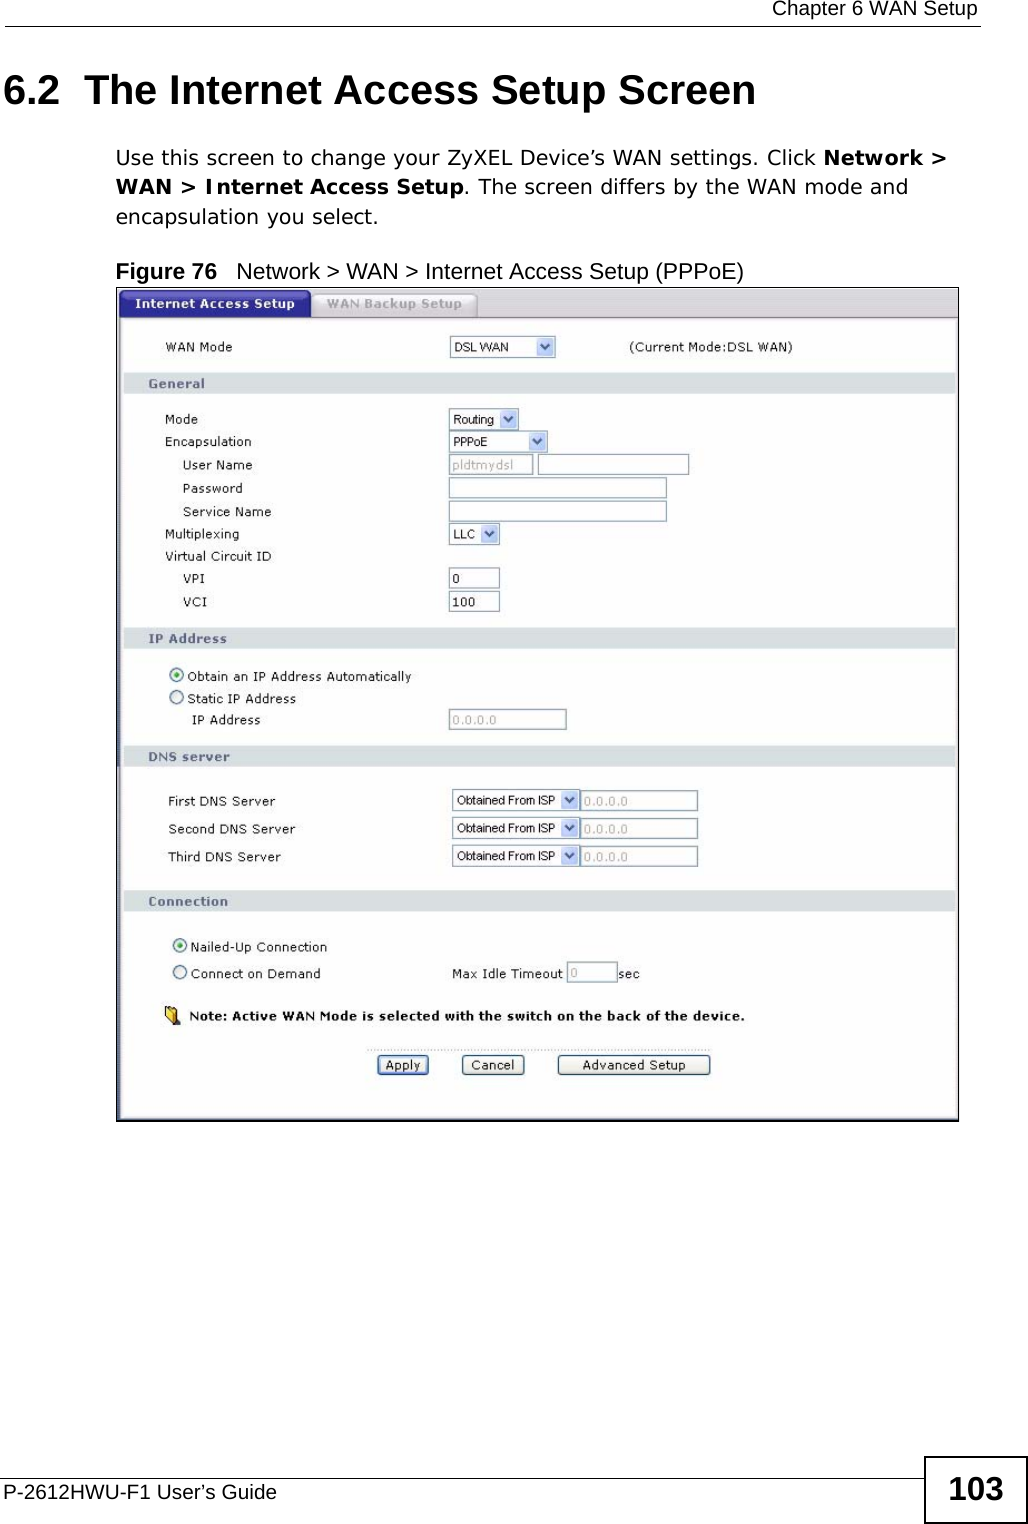  Chapter 6 WAN SetupP-2612HWU-F1 User’s Guide 1036.2  The Internet Access Setup Screen Use this screen to change your ZyXEL Device’s WAN settings. Click Network &gt; WAN &gt; Internet Access Setup. The screen differs by the WAN mode and encapsulation you select. Figure 76   Network &gt; WAN &gt; Internet Access Setup (PPPoE)